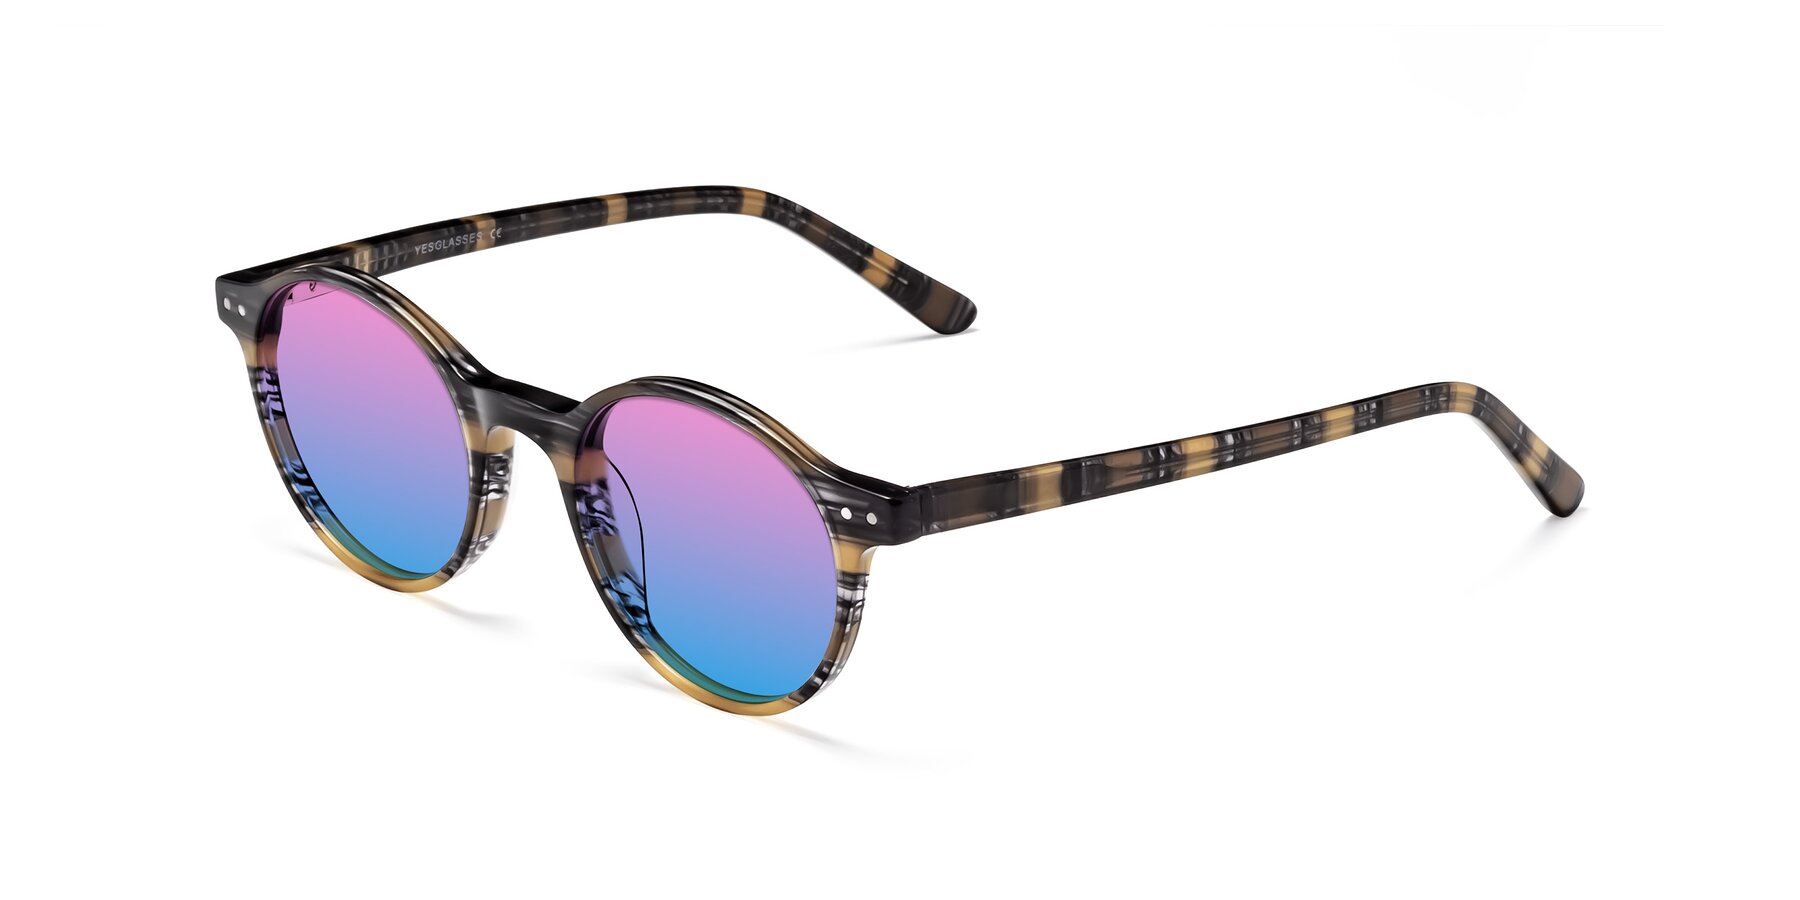 Angle of Jardi in Stripe Yellow Grey with Pink / Blue Gradient Lenses